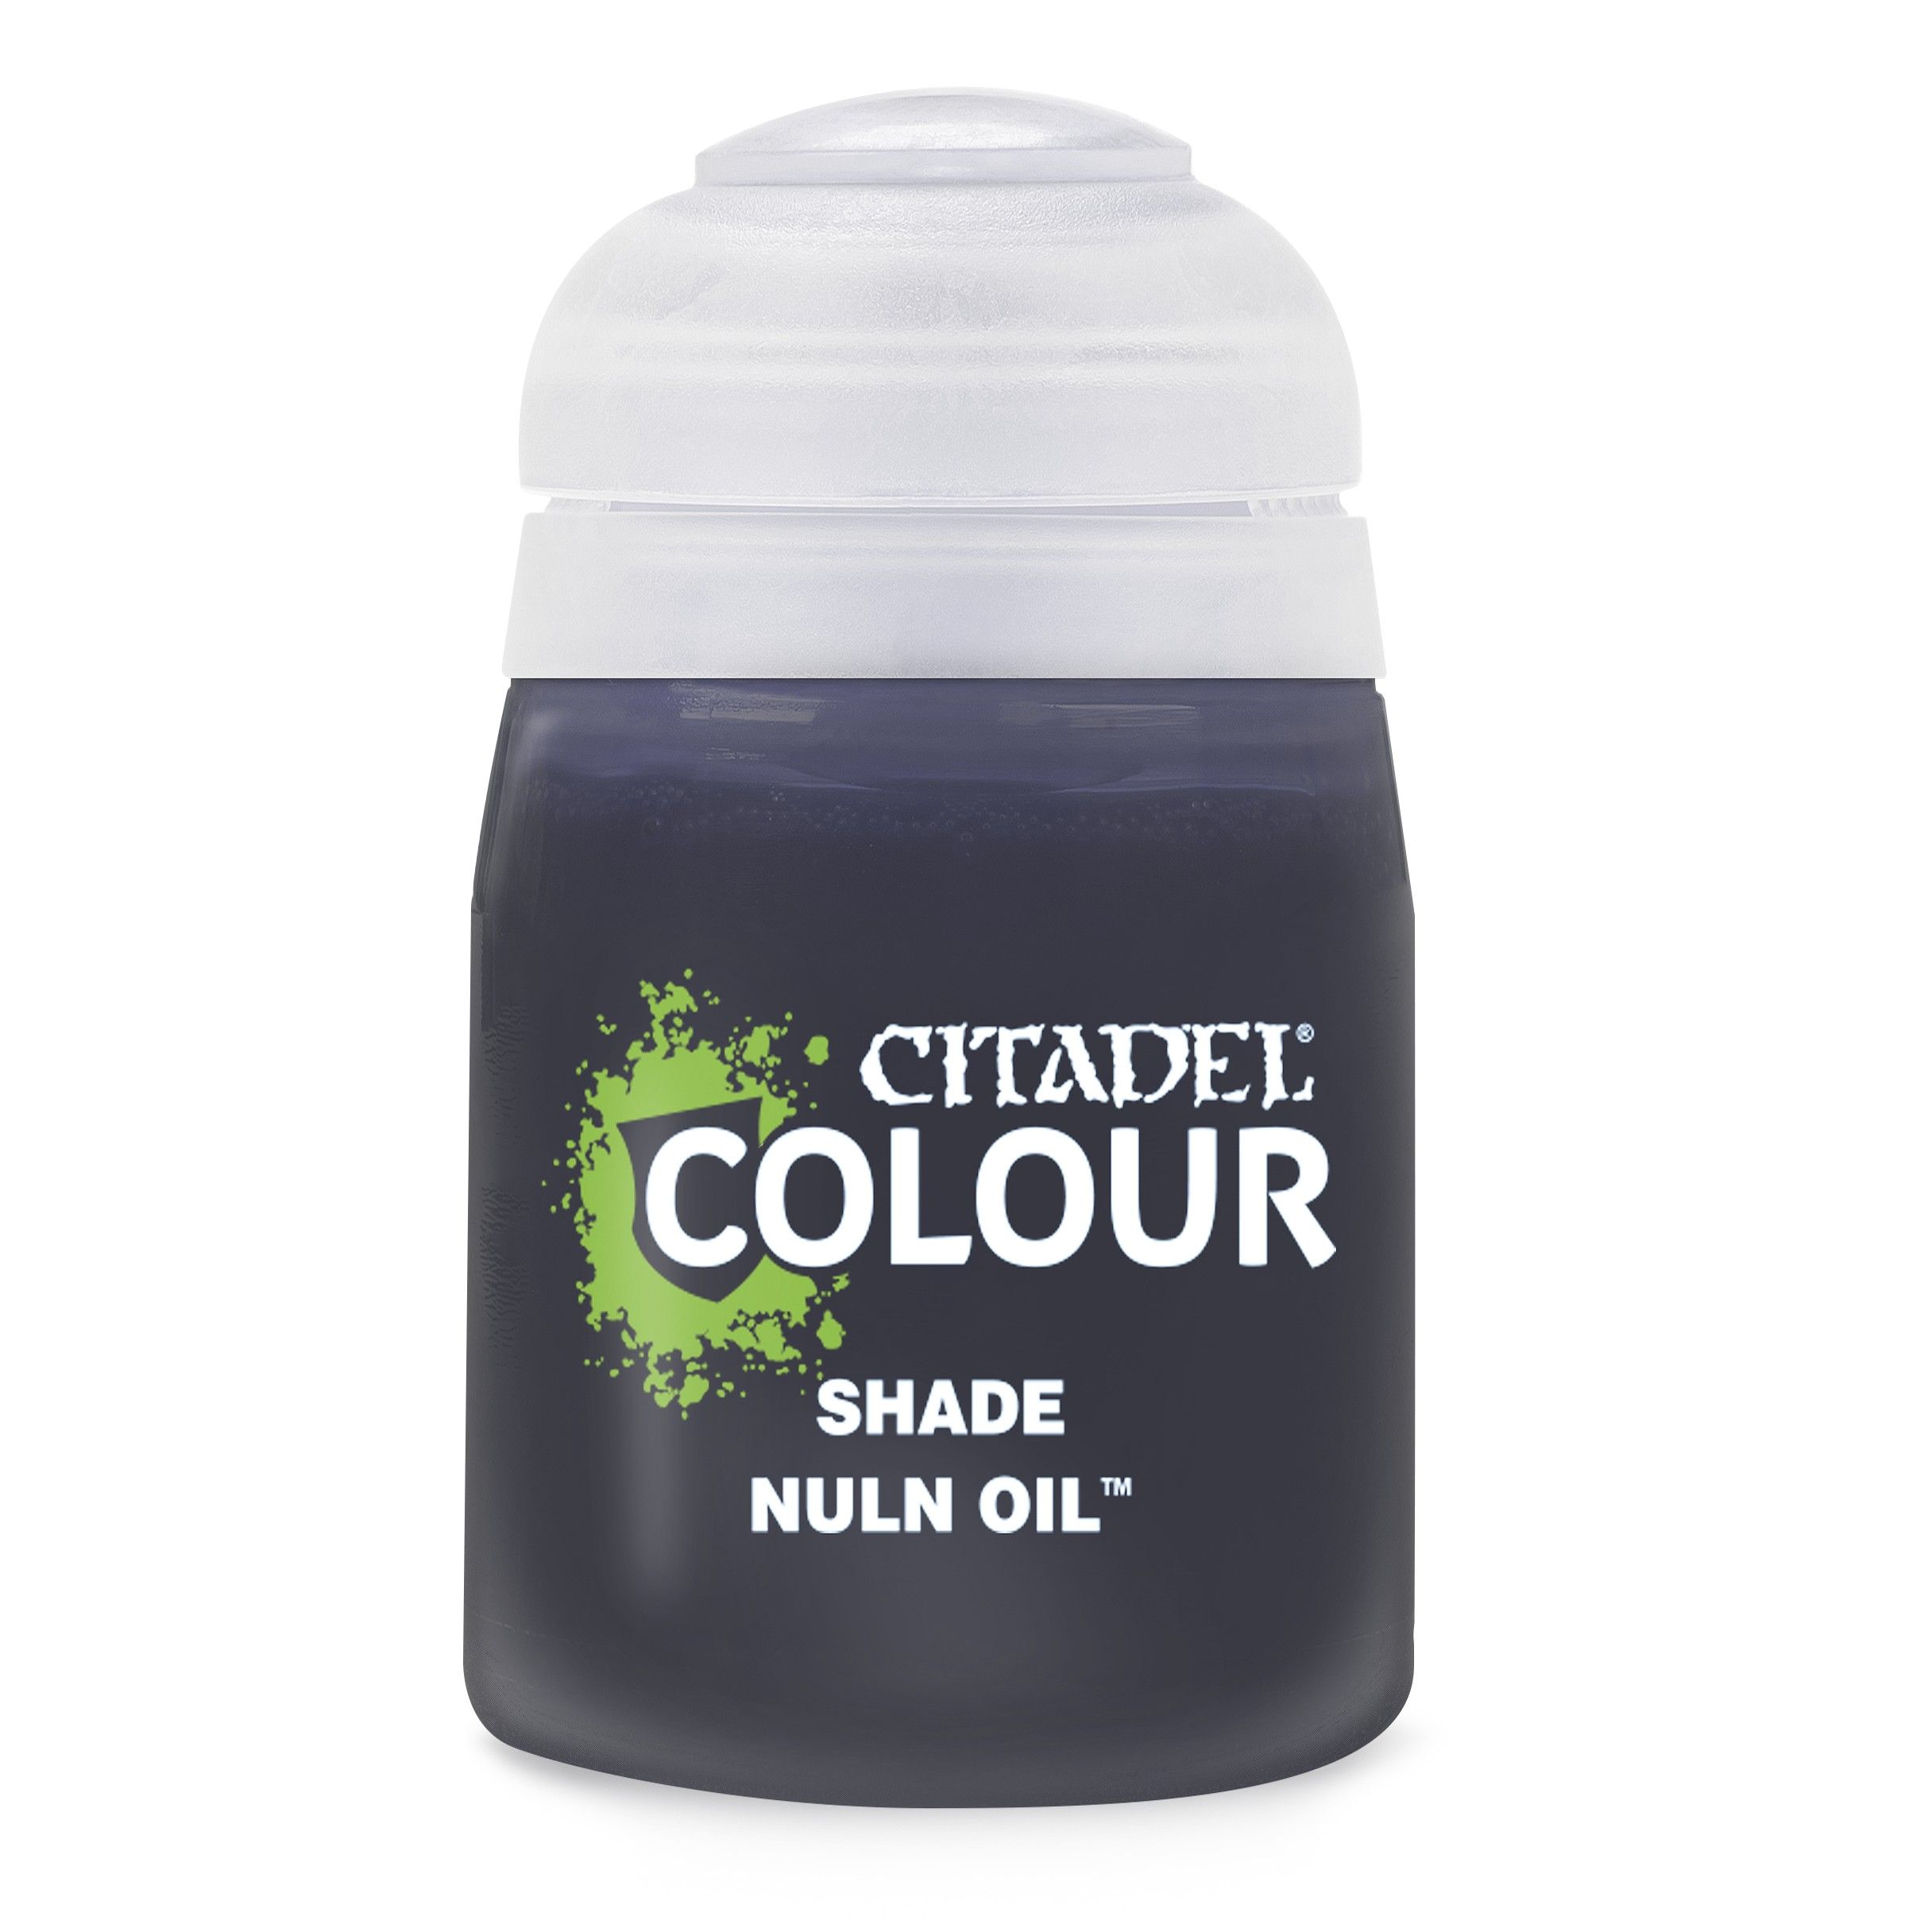 Nuln oil ( Agrax earthshade is this case) makes all the difference